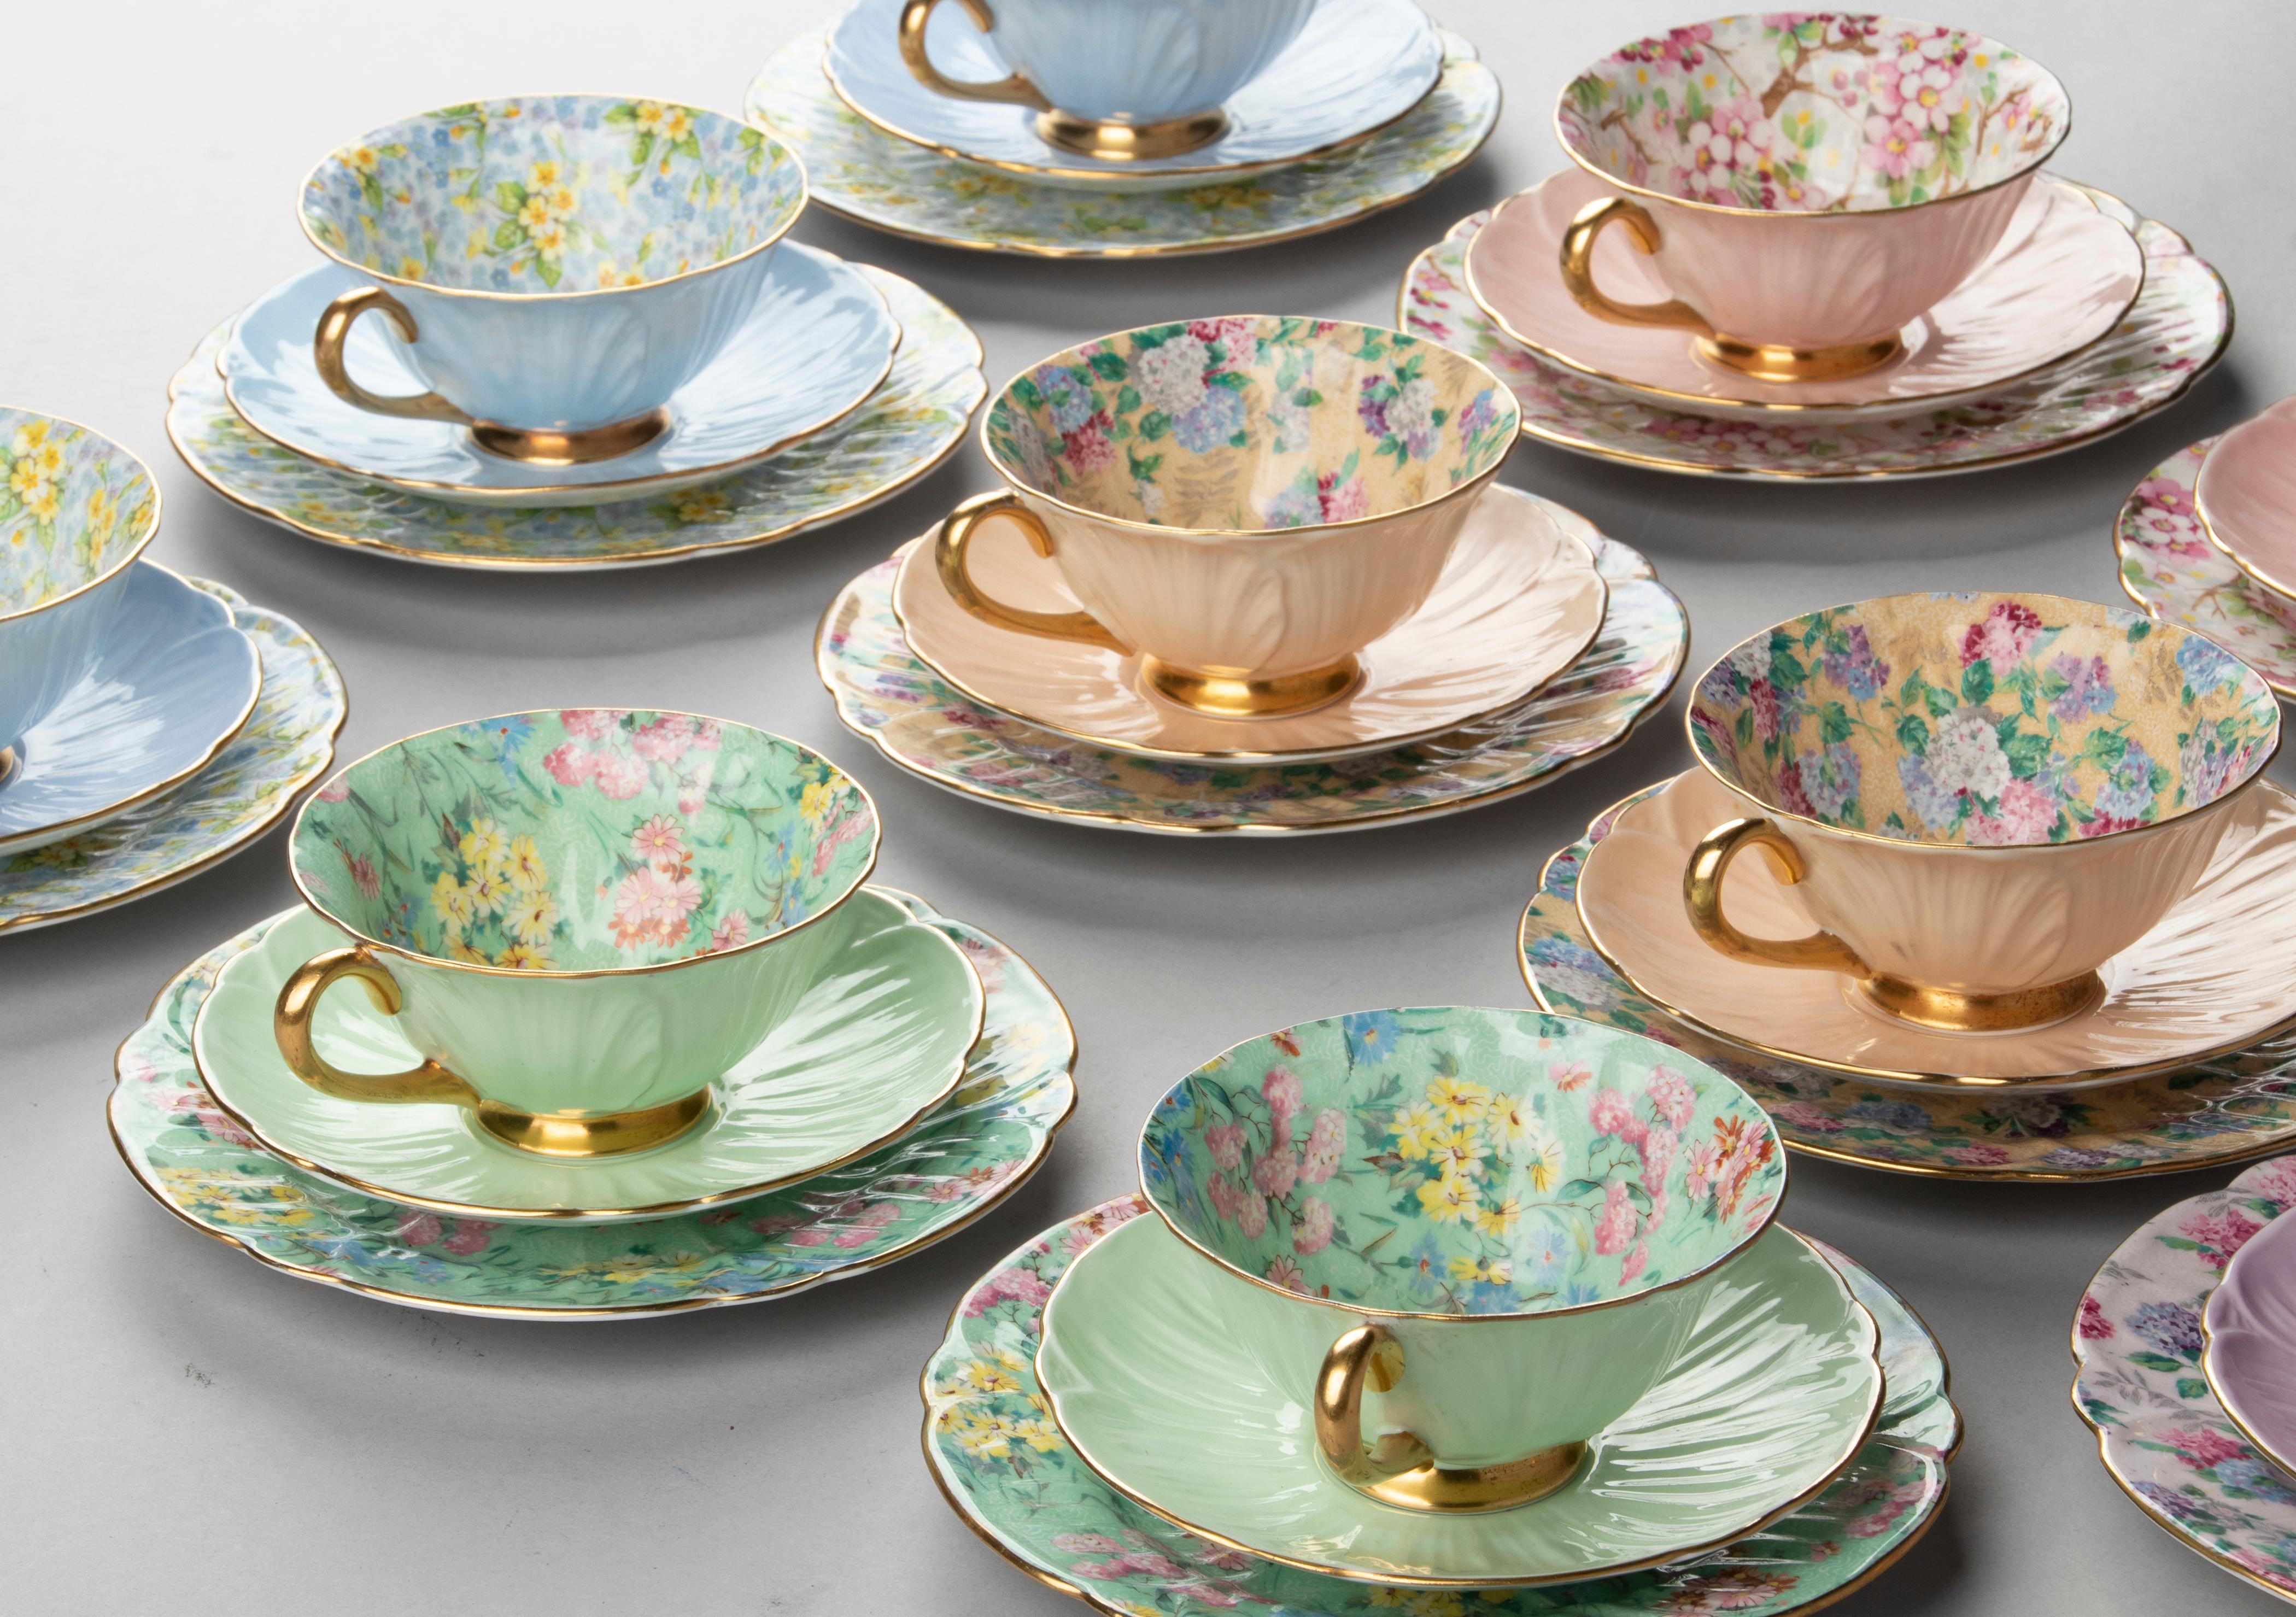 Mid-20th Century 1930's Teaset for 10 Persons Made by Shelly with Chintz Pattern